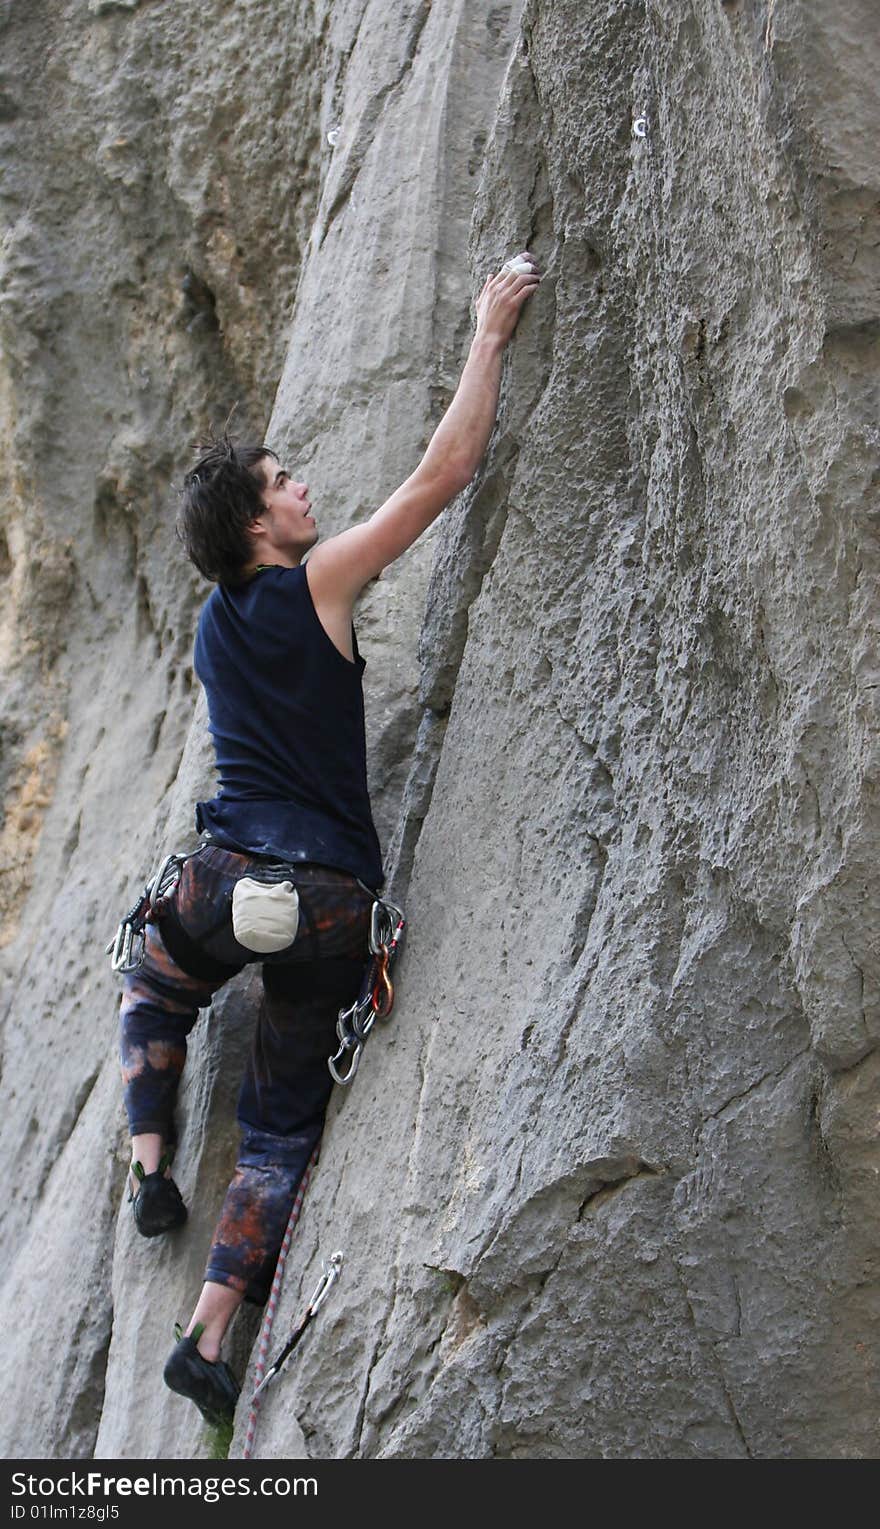 Climber in action on limestone rock